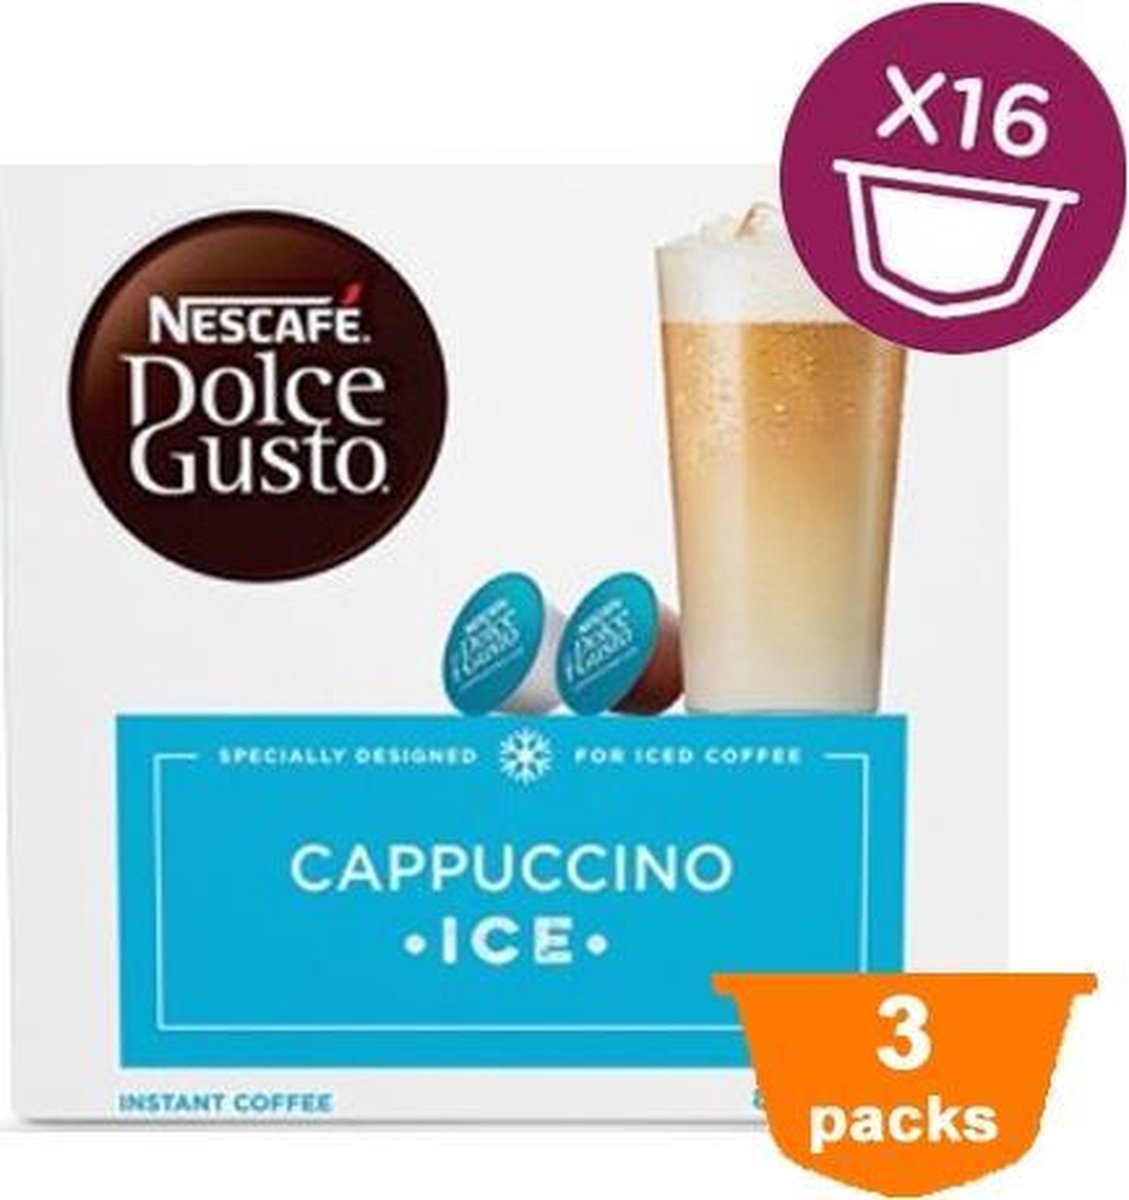 Nescafe Dolce Gusto Cappuccino Ice Cheap Deals, 47% OFF | maikyaulaw.com